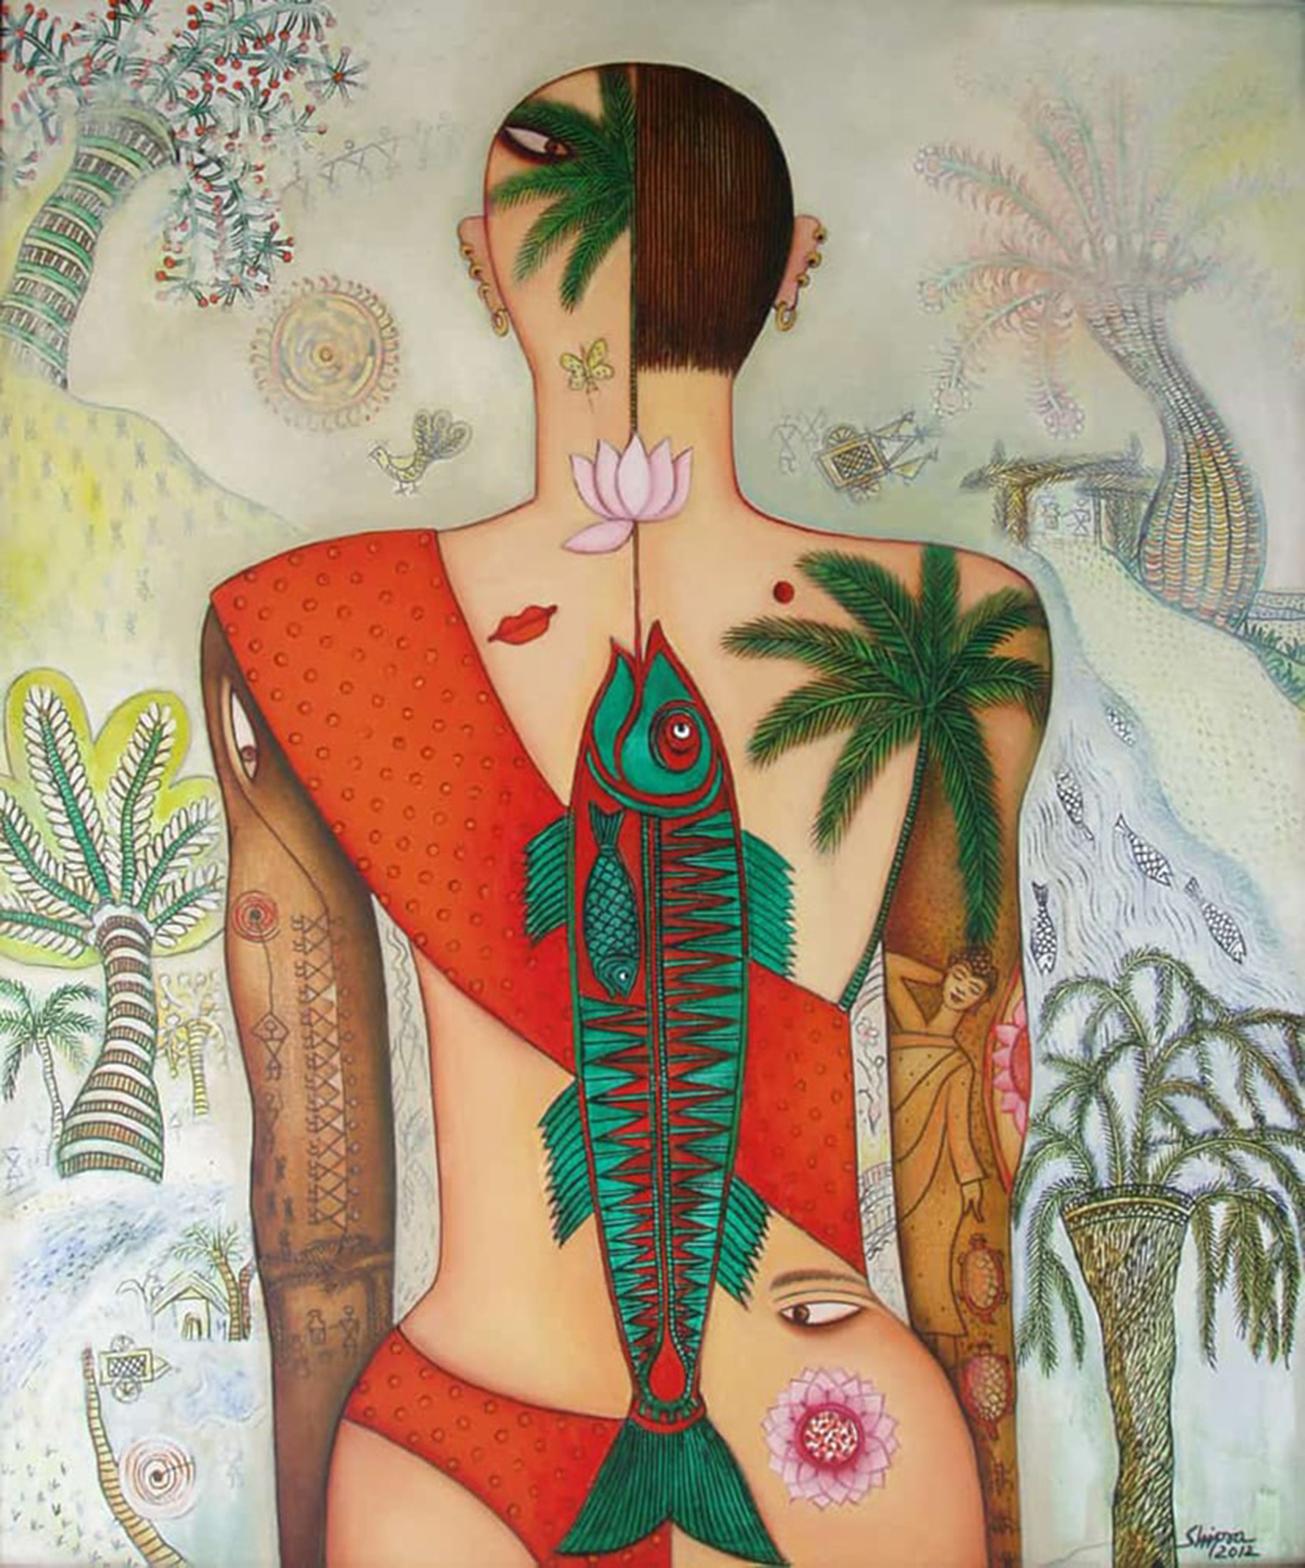 Shipra Bhattacharya Figurative Painting - Women, Acrylic on canvas, Red, Green, Pink, Brown by Indian Artist "In Stock"